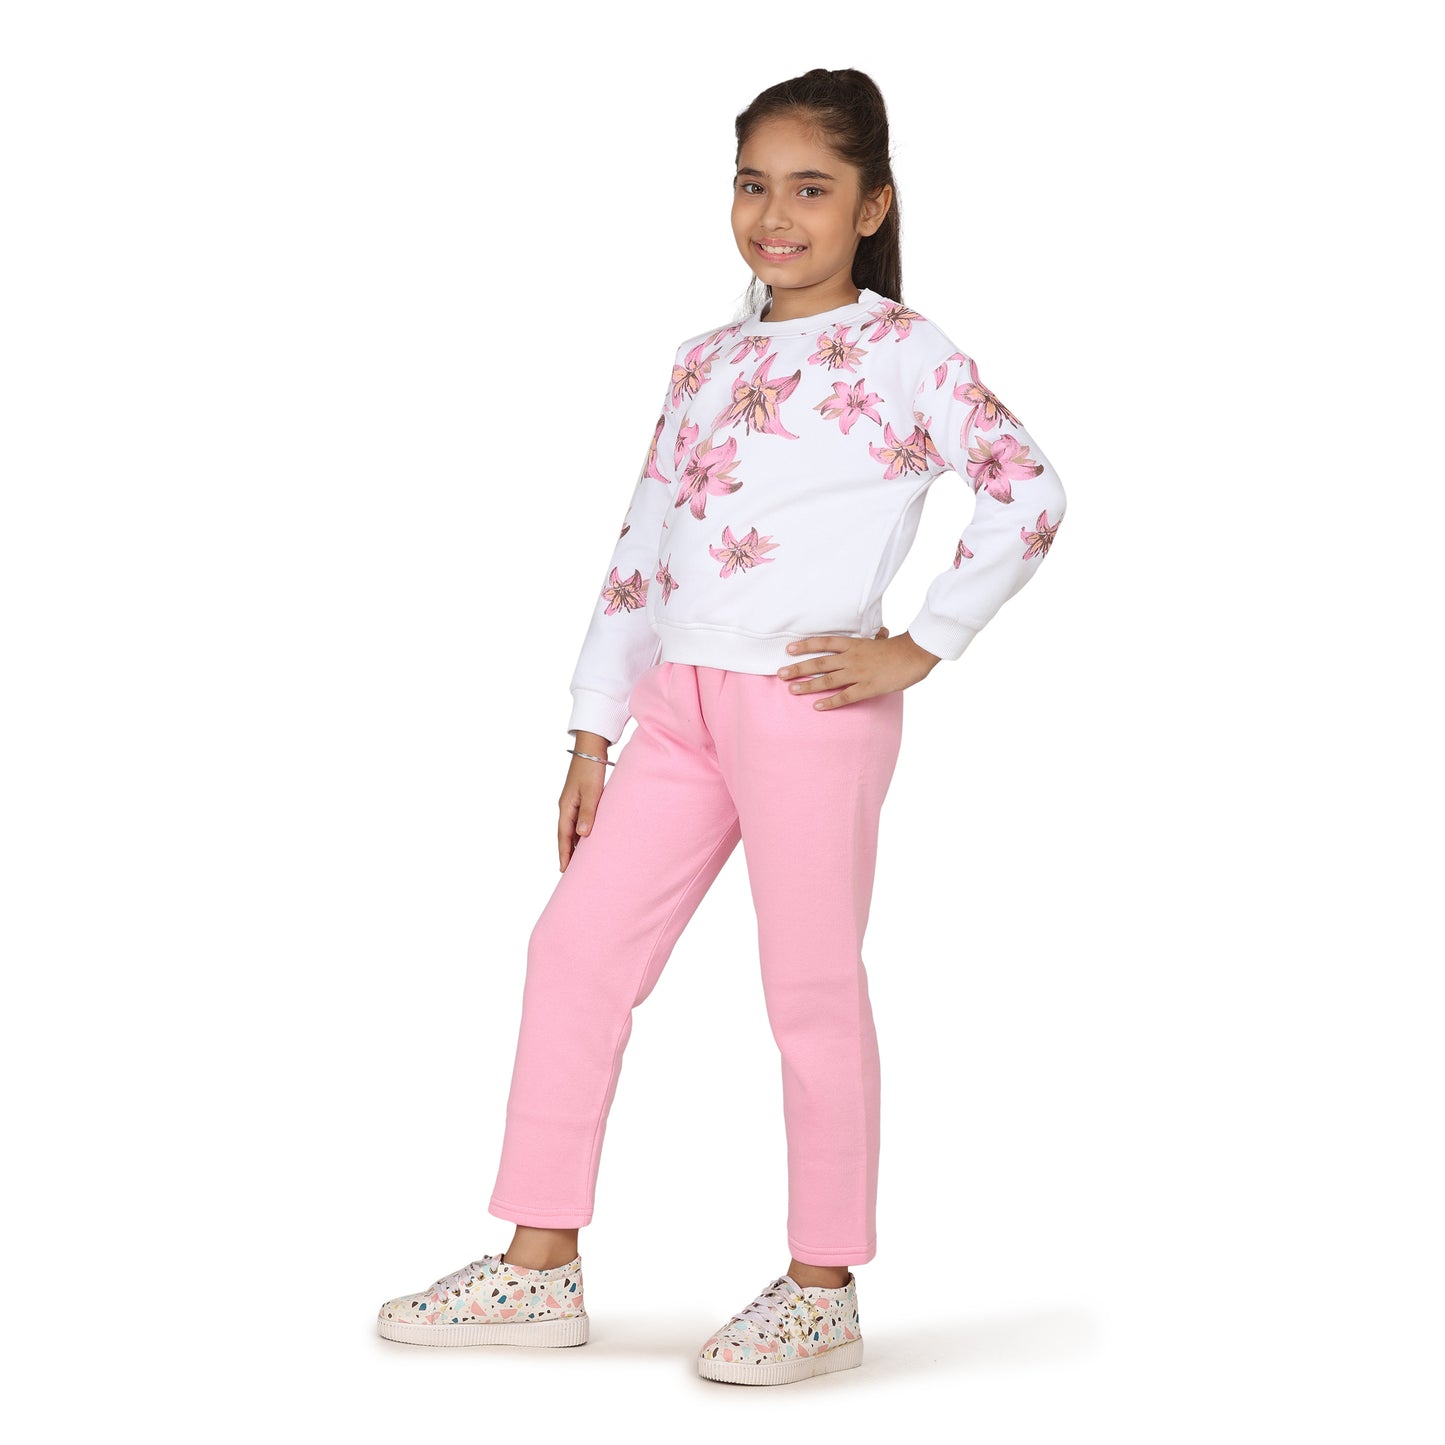 Pampolina Girls Floral Printed Track suit - Pink